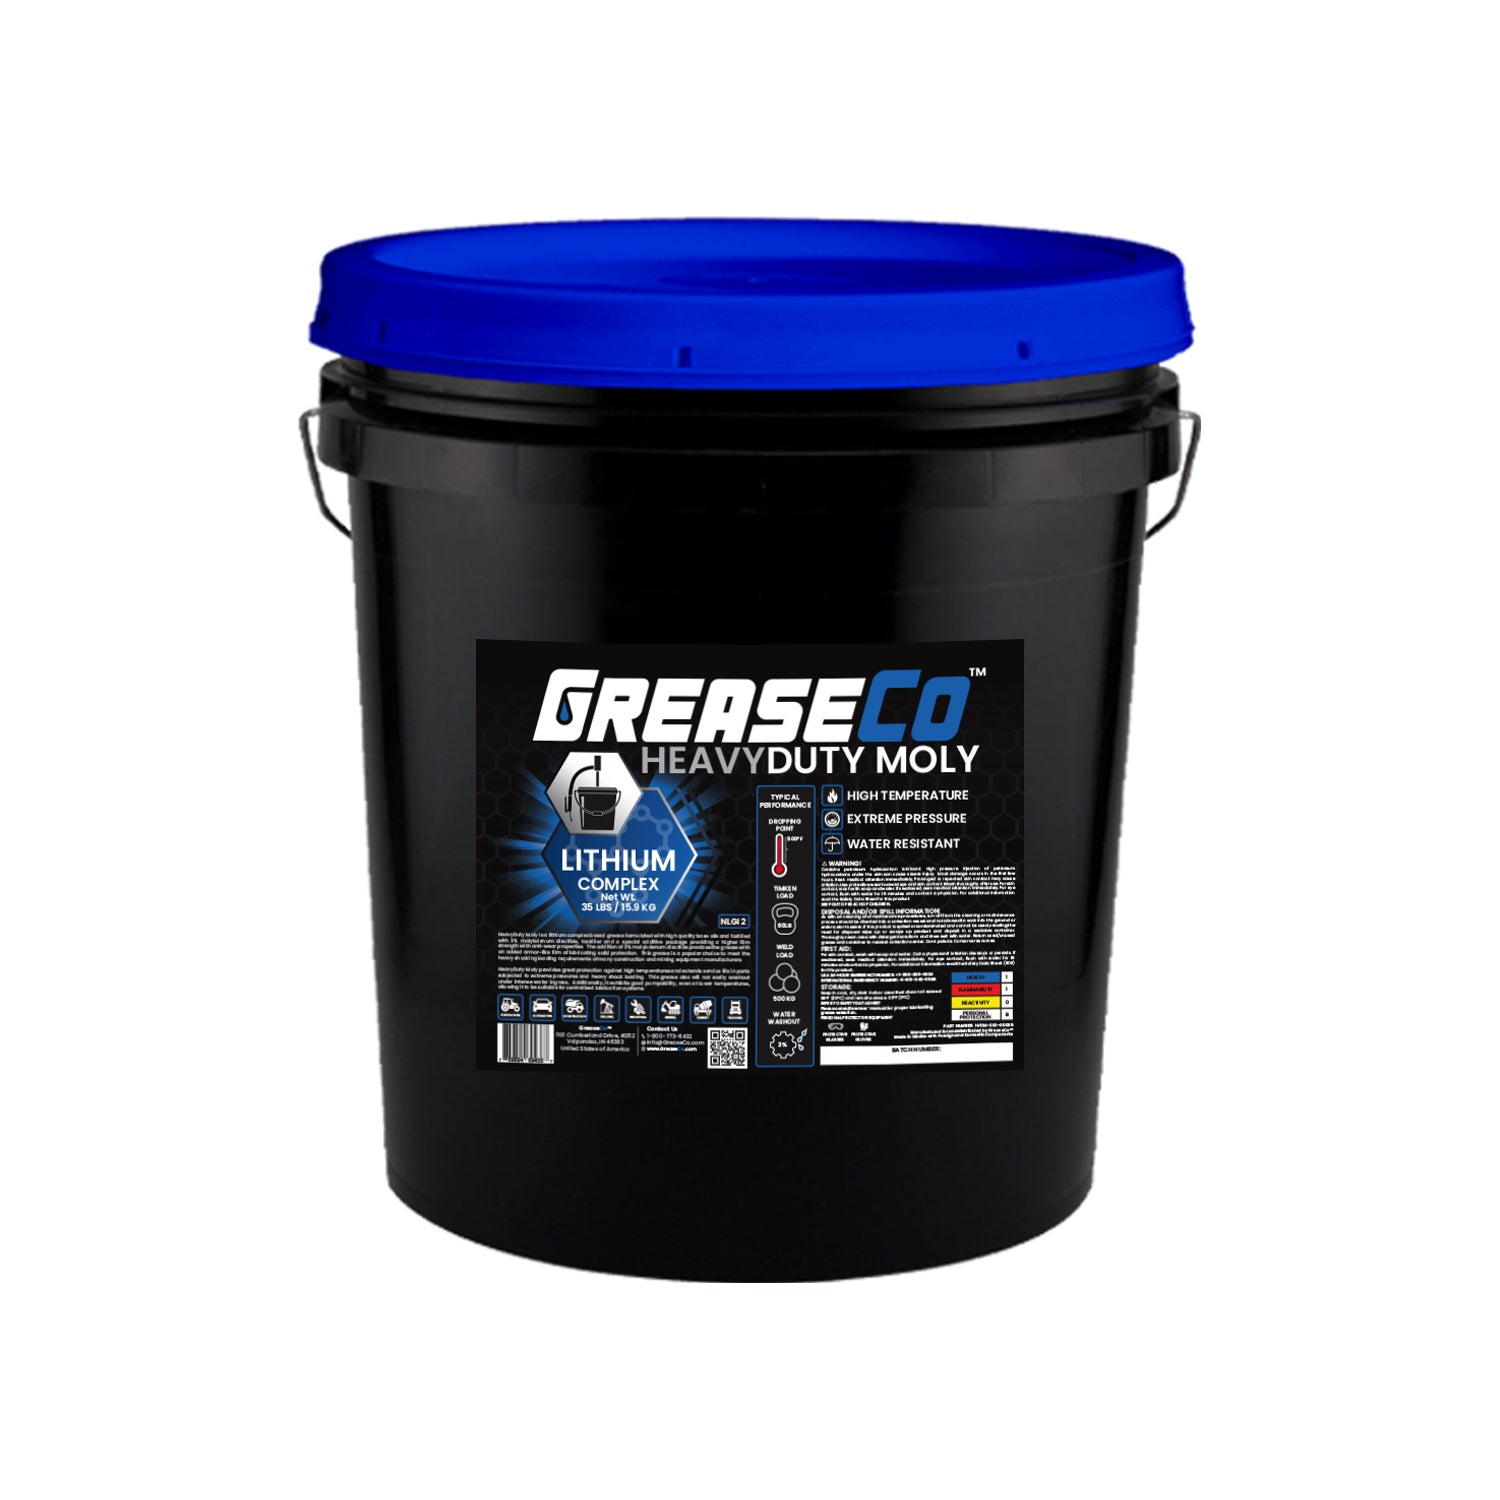 Lithium Complex Moly Wheel Bearing High Temp High Performance Grease 35 LB Pail of GreaseCo HeavyDuty Moly